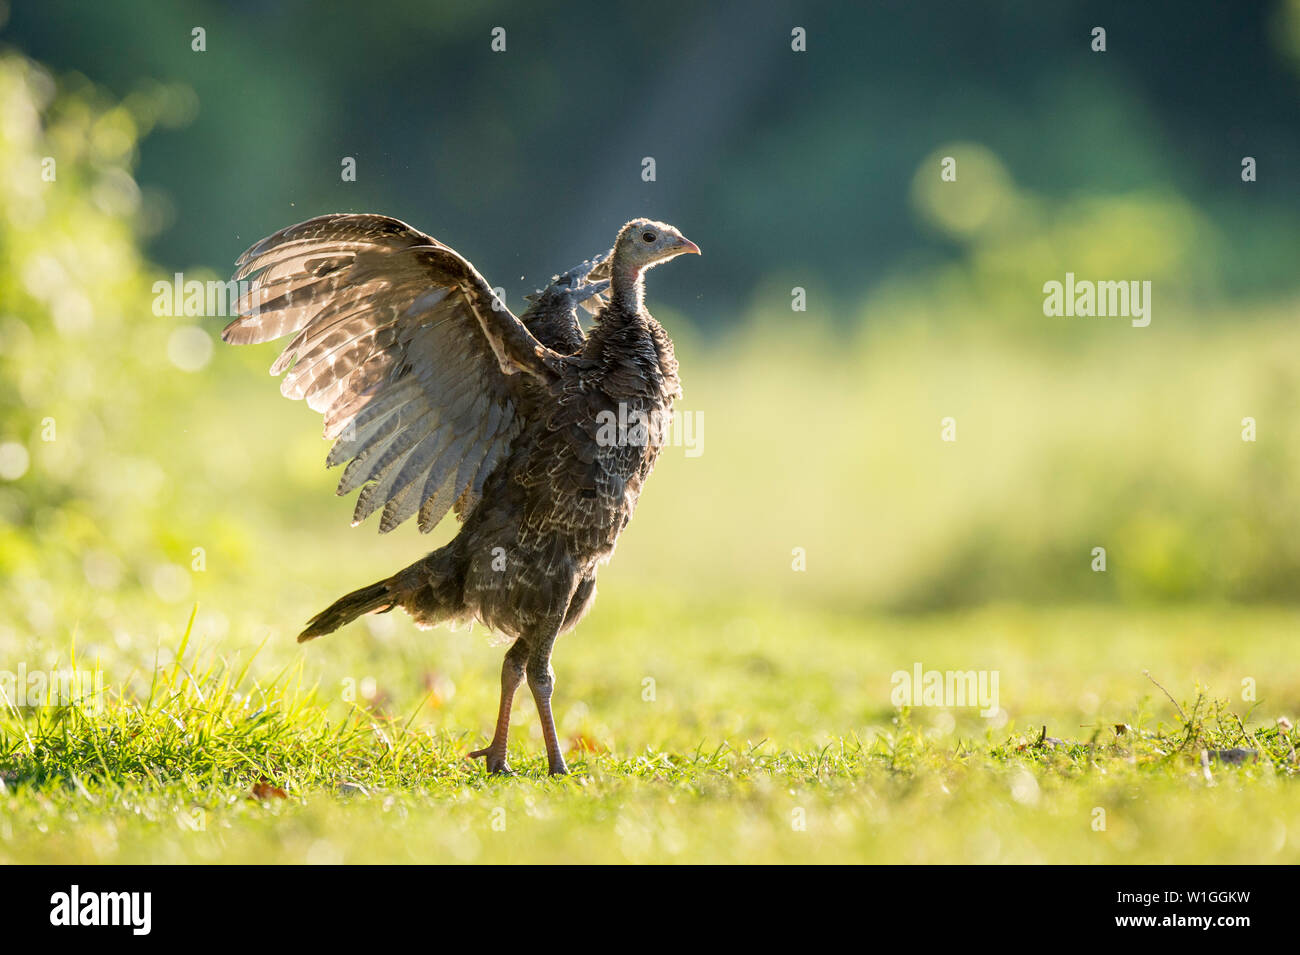 A young Wild Turkey flexes its wings as it glows in the early morning sun standing in a grassy field. Stock Photo